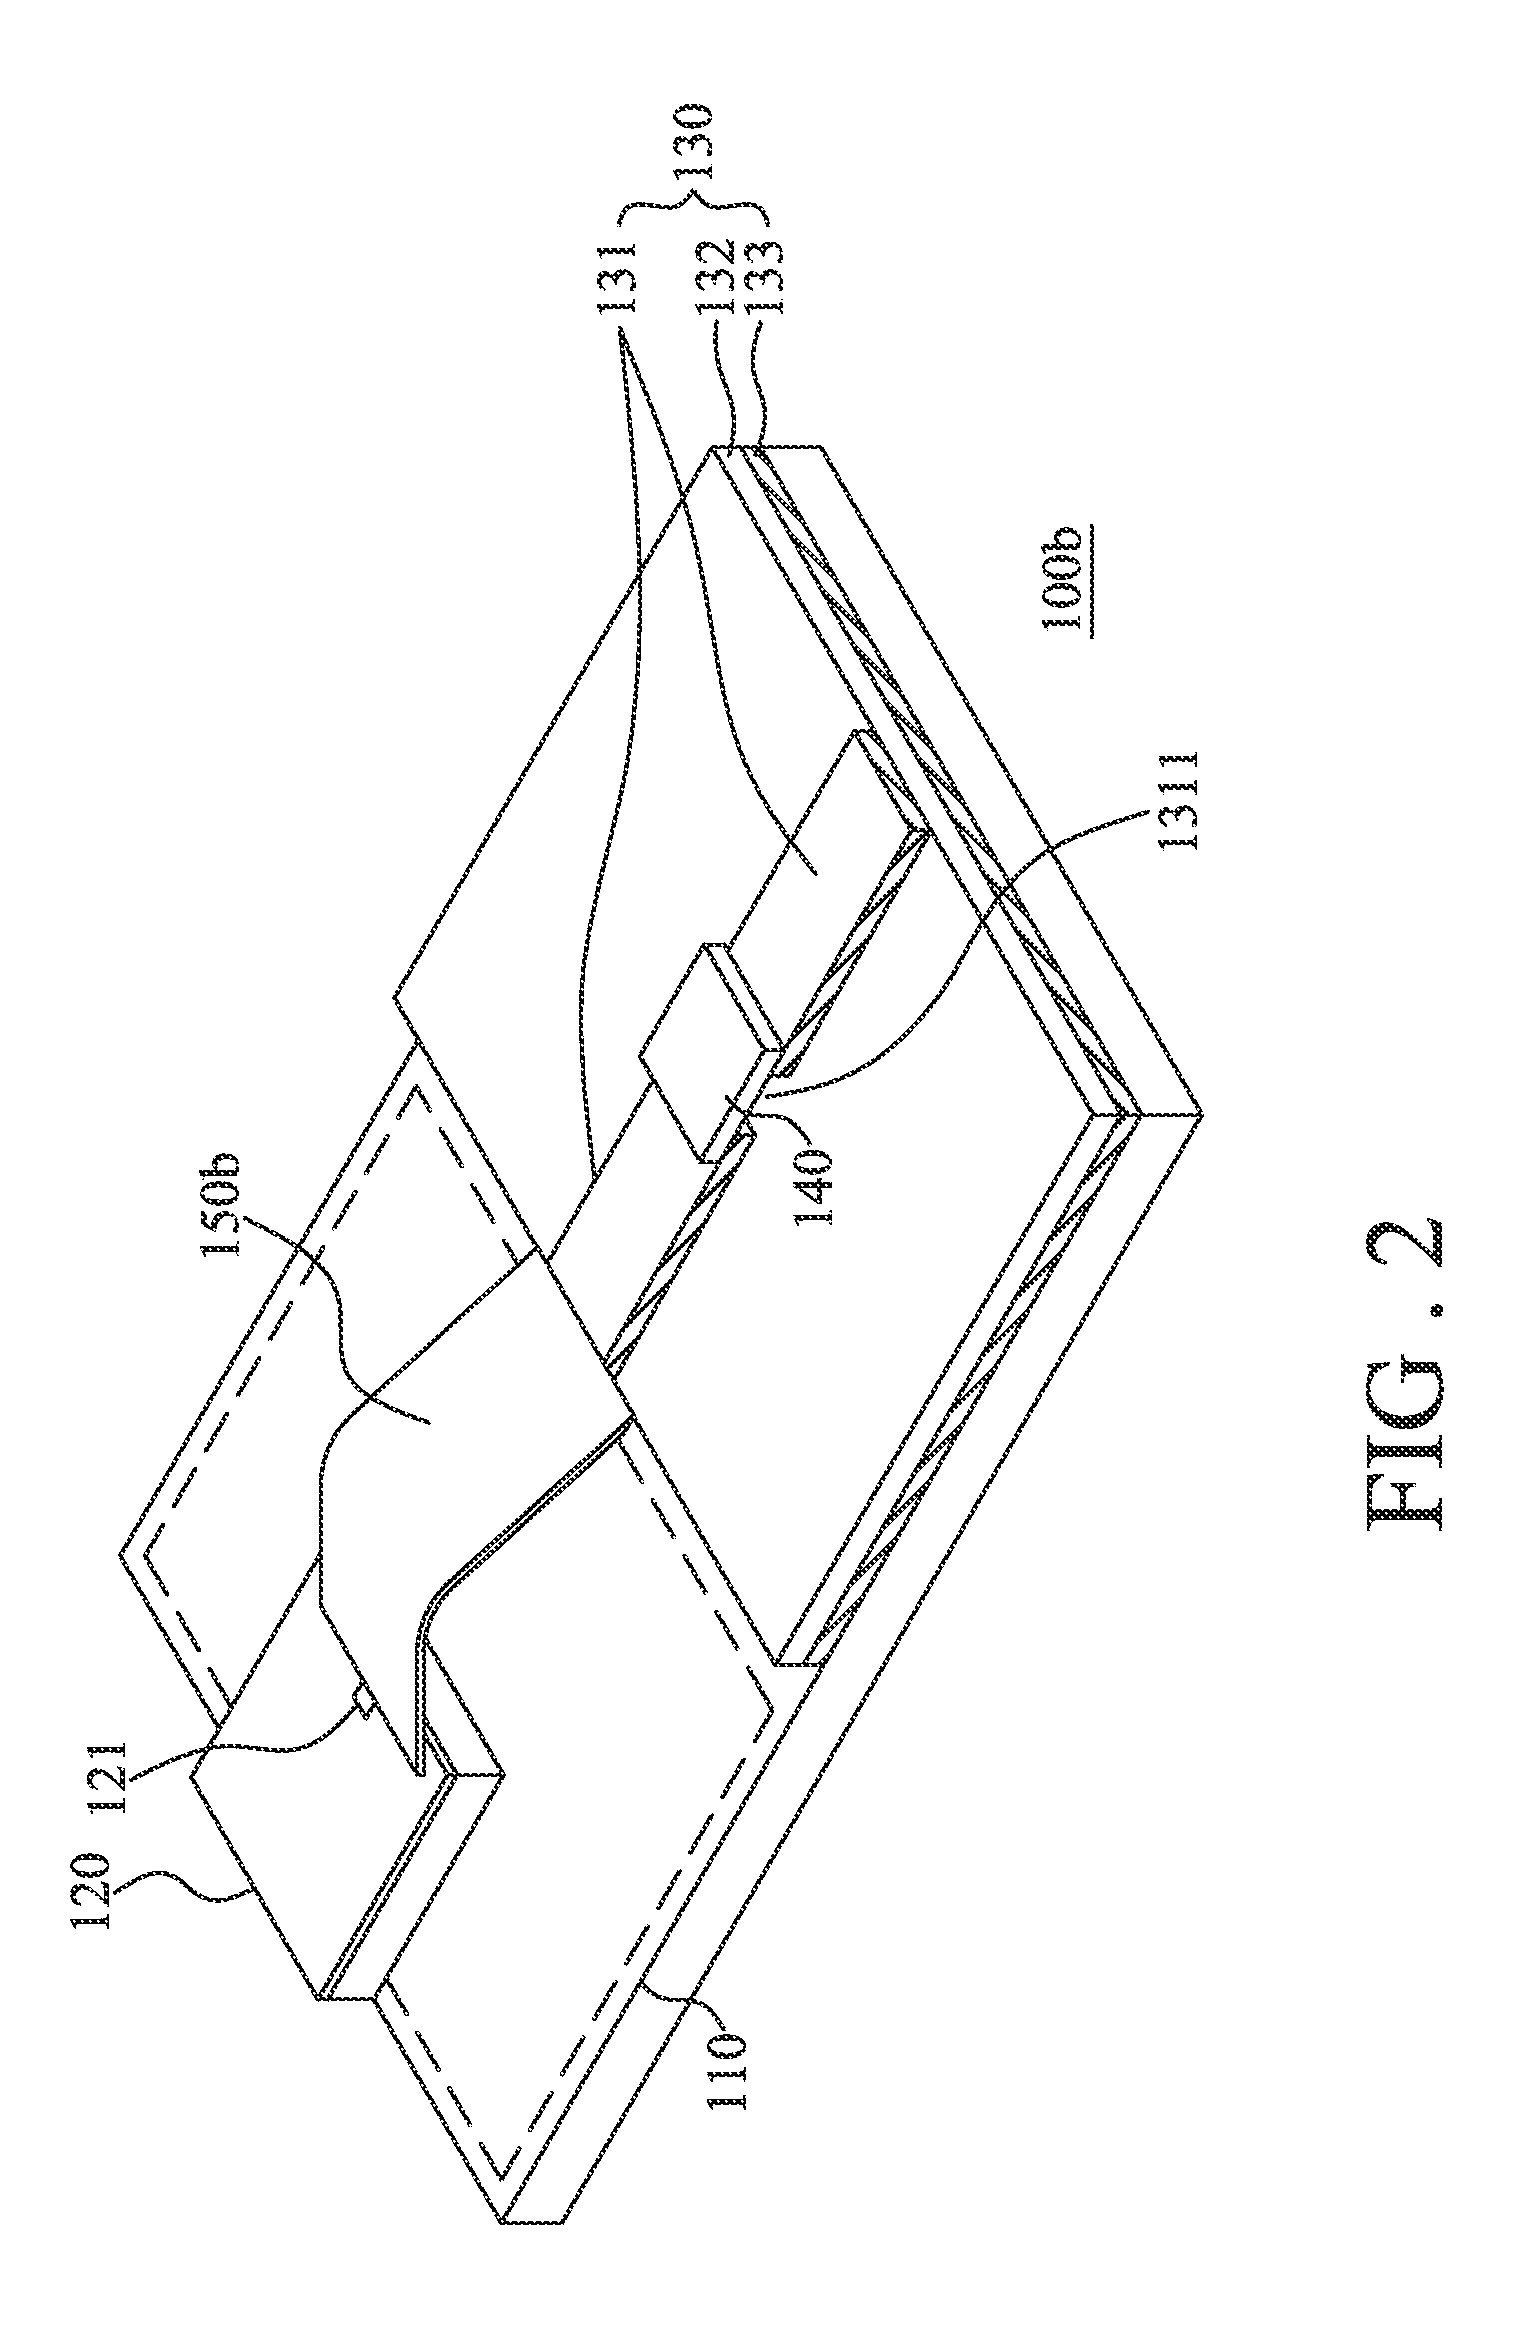 Capacitive bonding structure for electronic devices